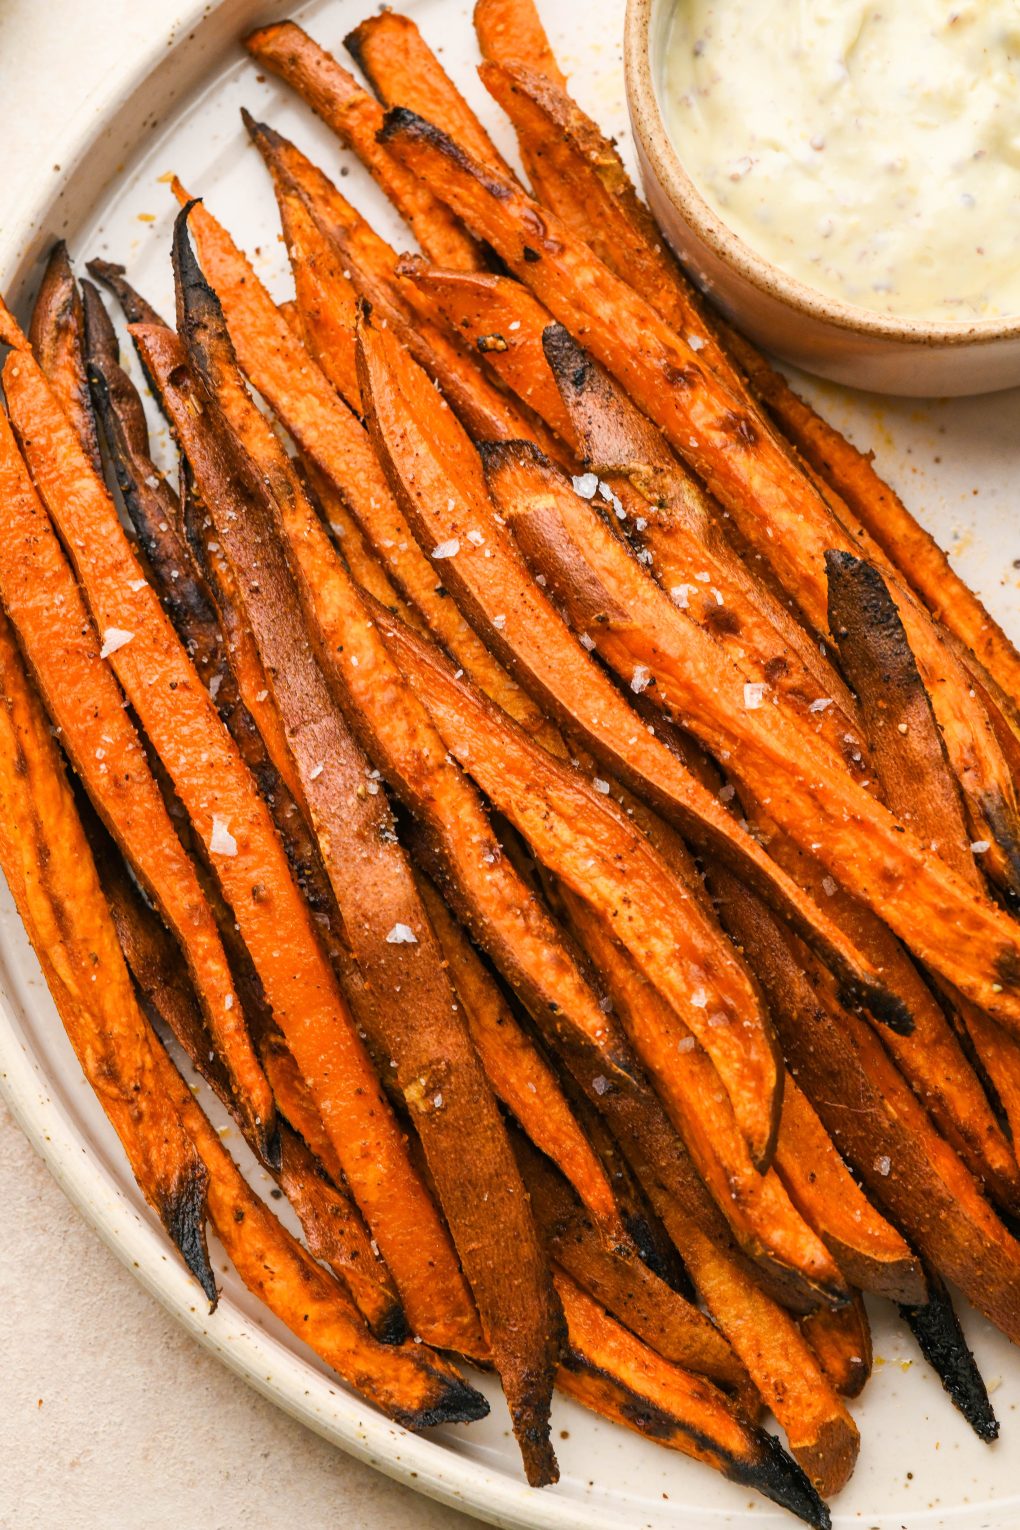 A large speckled plate filled with crispy roasted sweet potato fries next to a ramekin of aioli and a ramekin of ketchup. On a light cream colored surface.